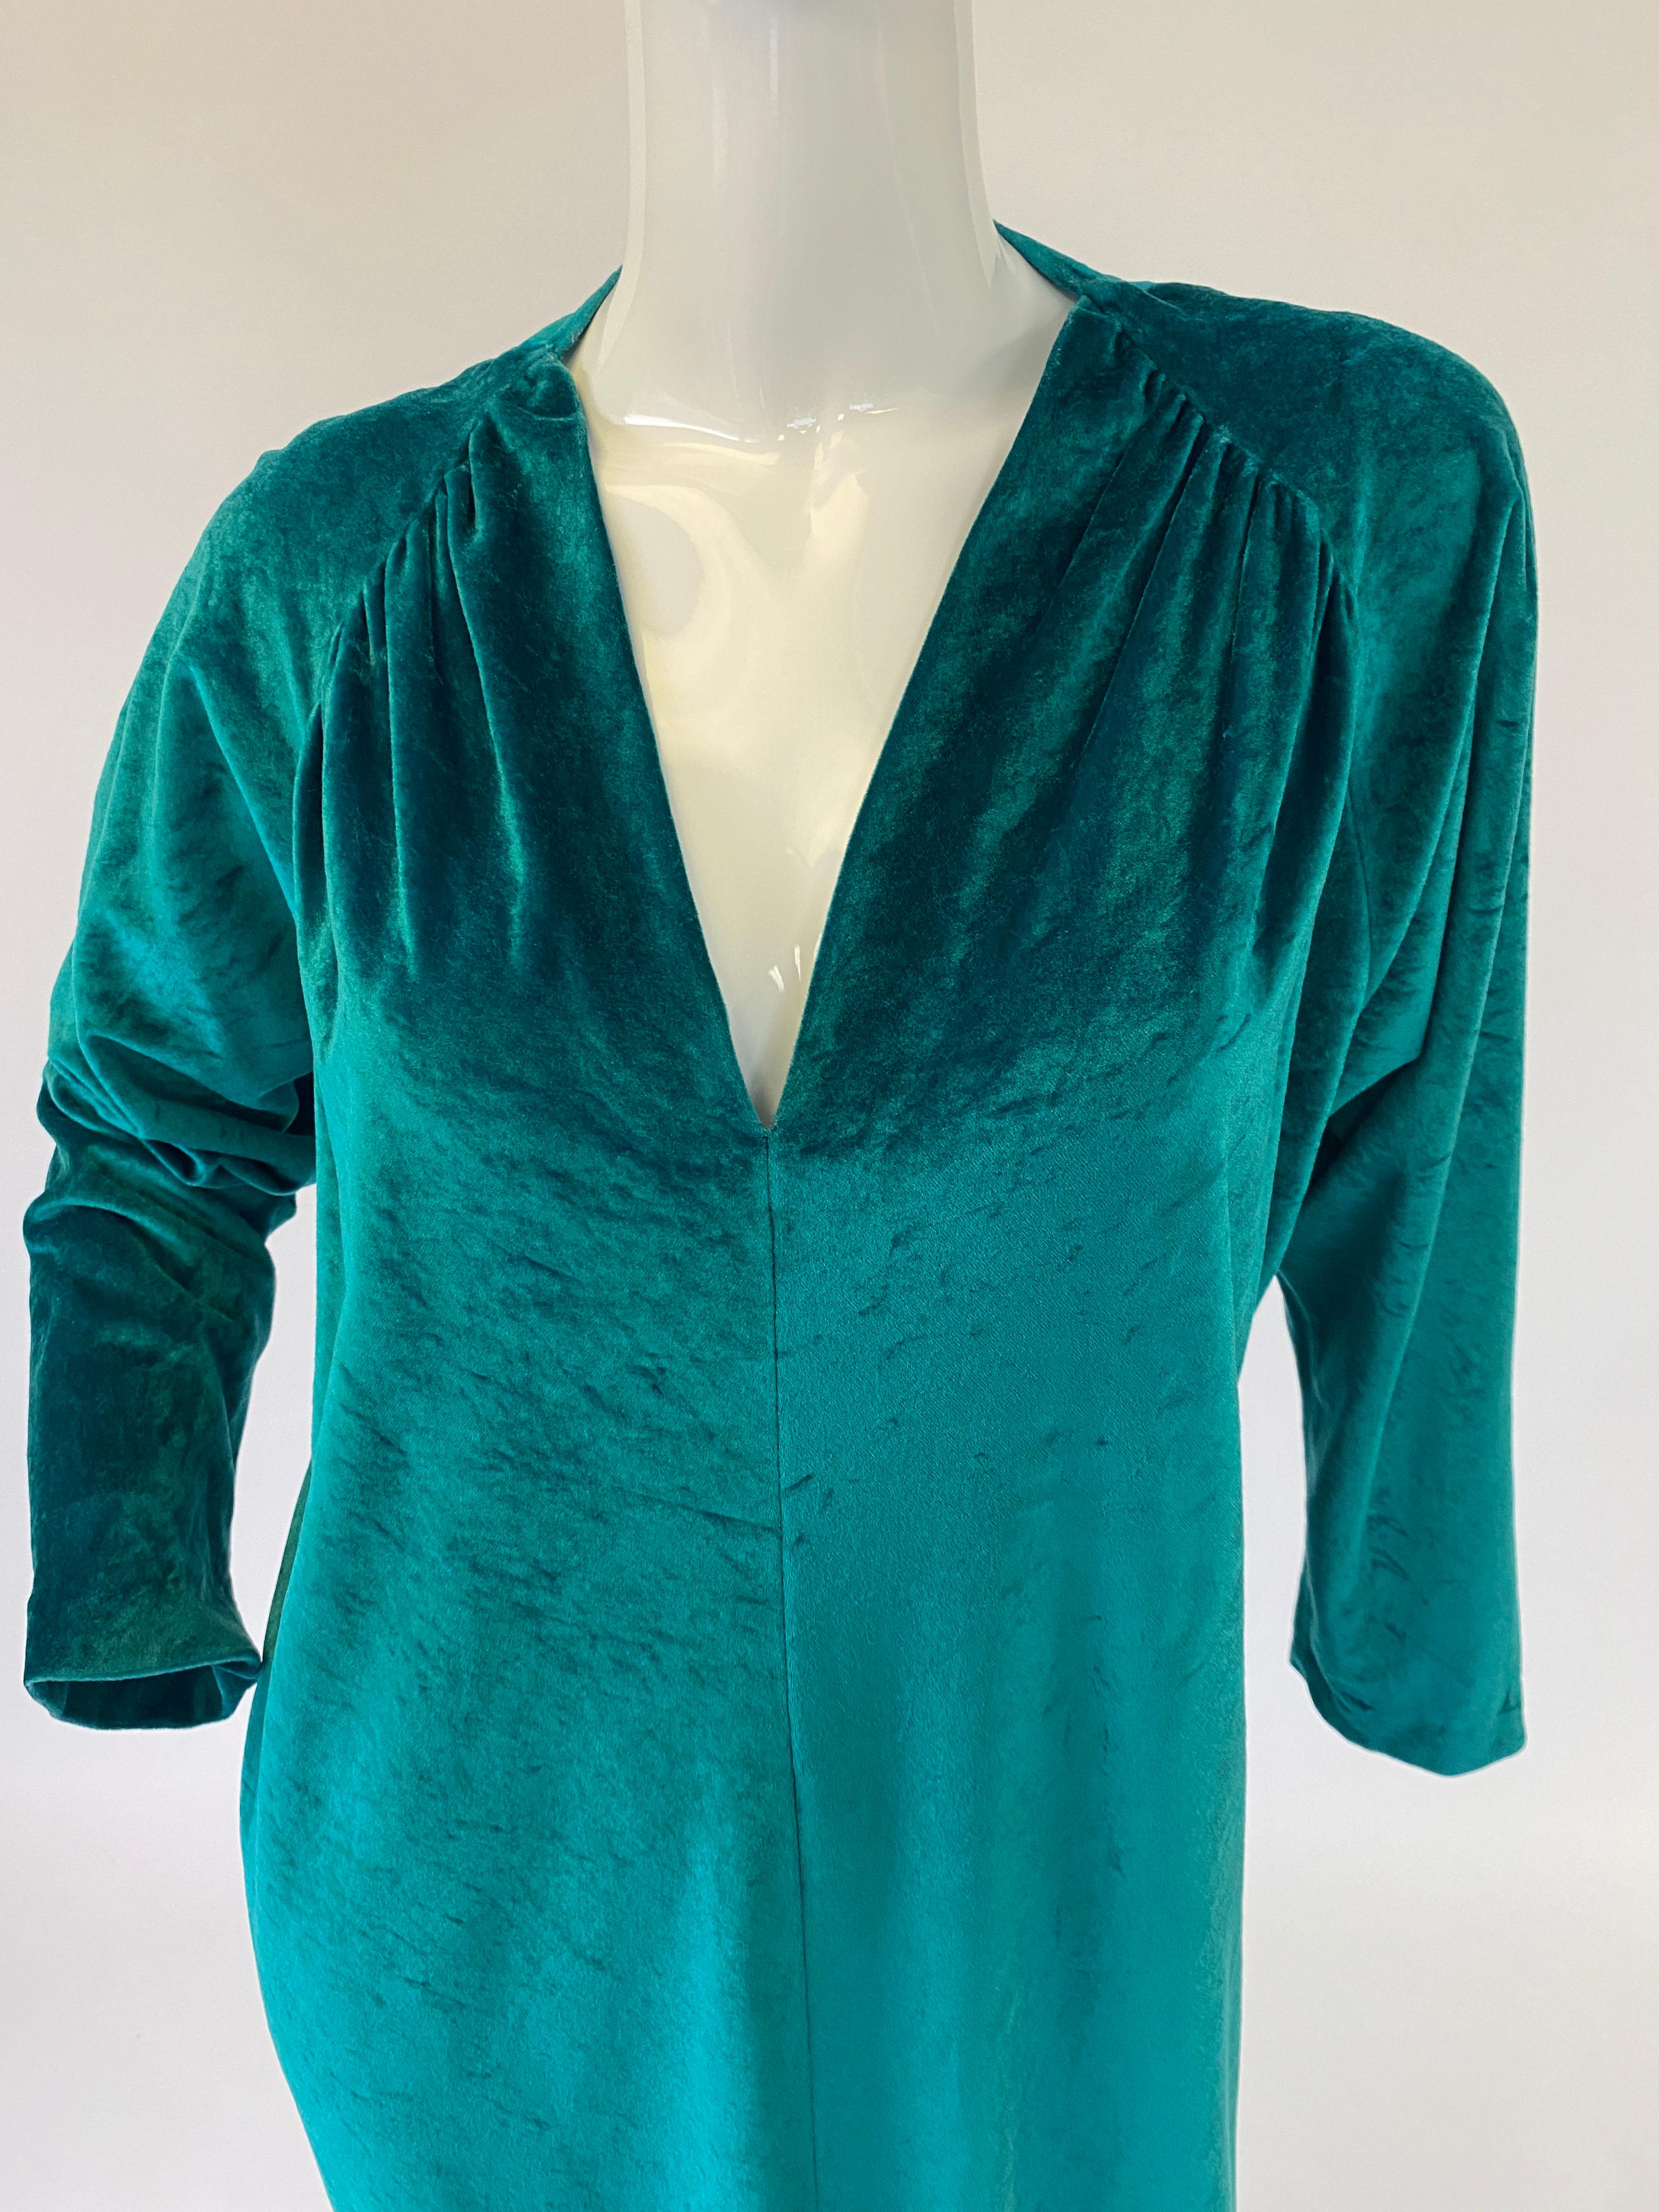 

Simple, elegant, and small splash of detail: all the components within a classic Halston piece. 
This Halston IV Kaftan's cut features a deep v neck with a seam the comes down to a 25